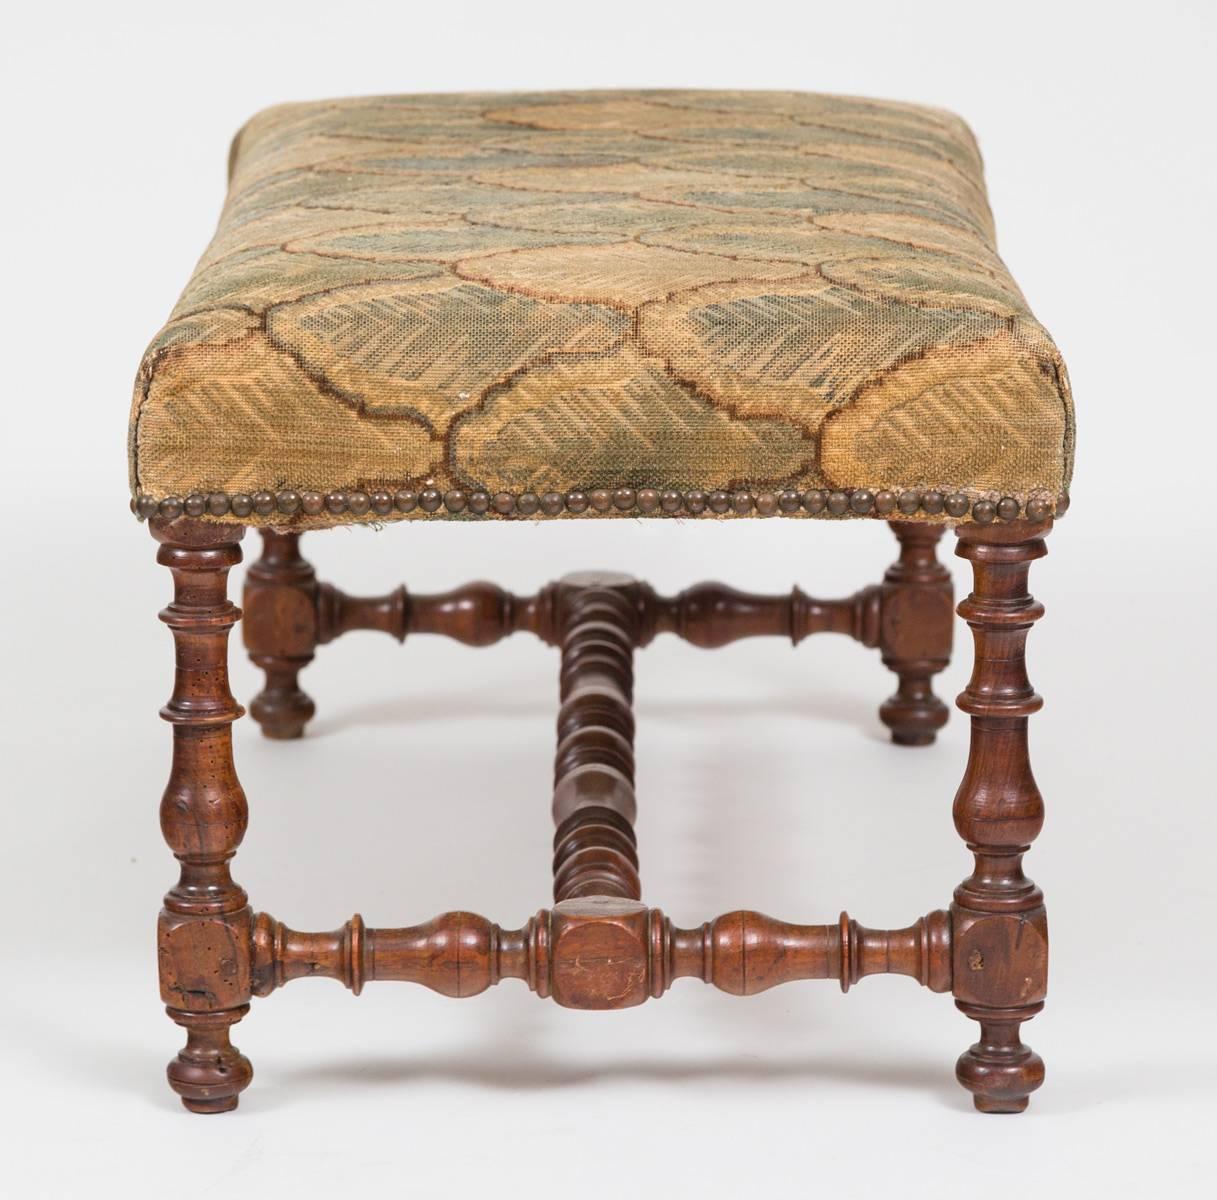 Flemish walnut long stool or bench with rectangular stuff-over seat finished with brass nailheads above four pegged baluster turned legs joined by H-shaped stretchers. Upholstered in old velvet fabric.